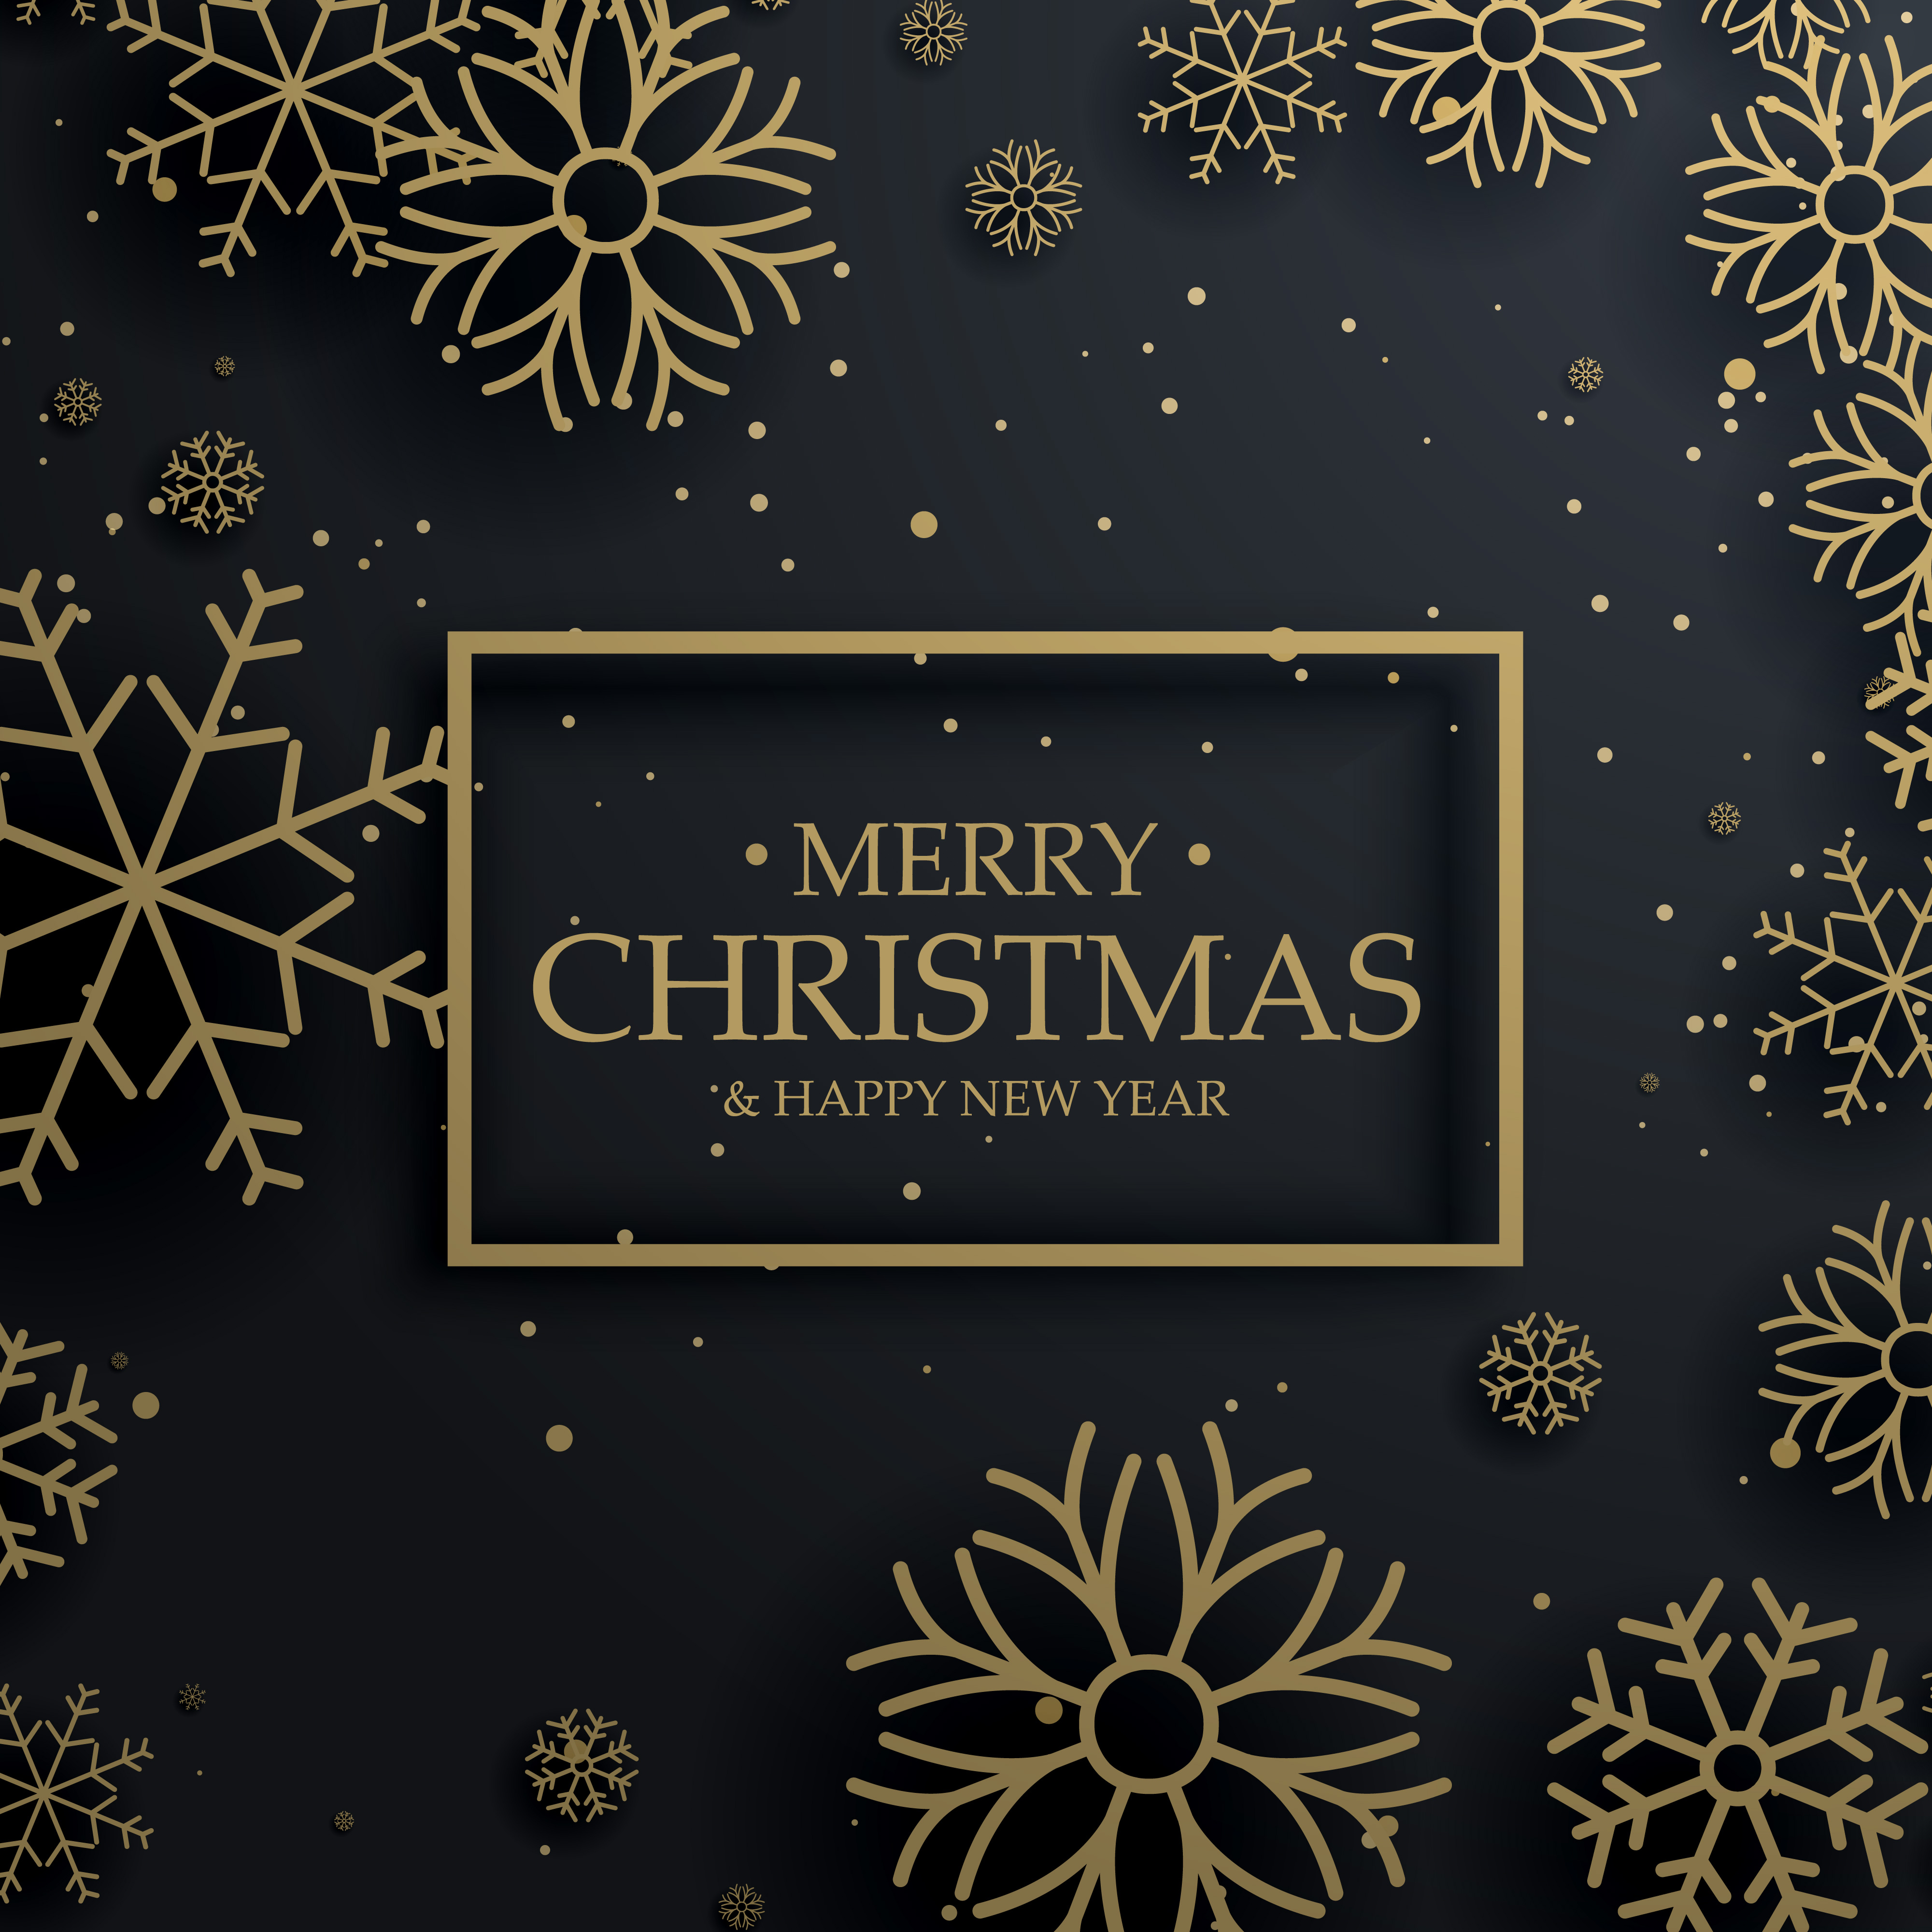 beautiful merry christmas greeting card with gold ...
